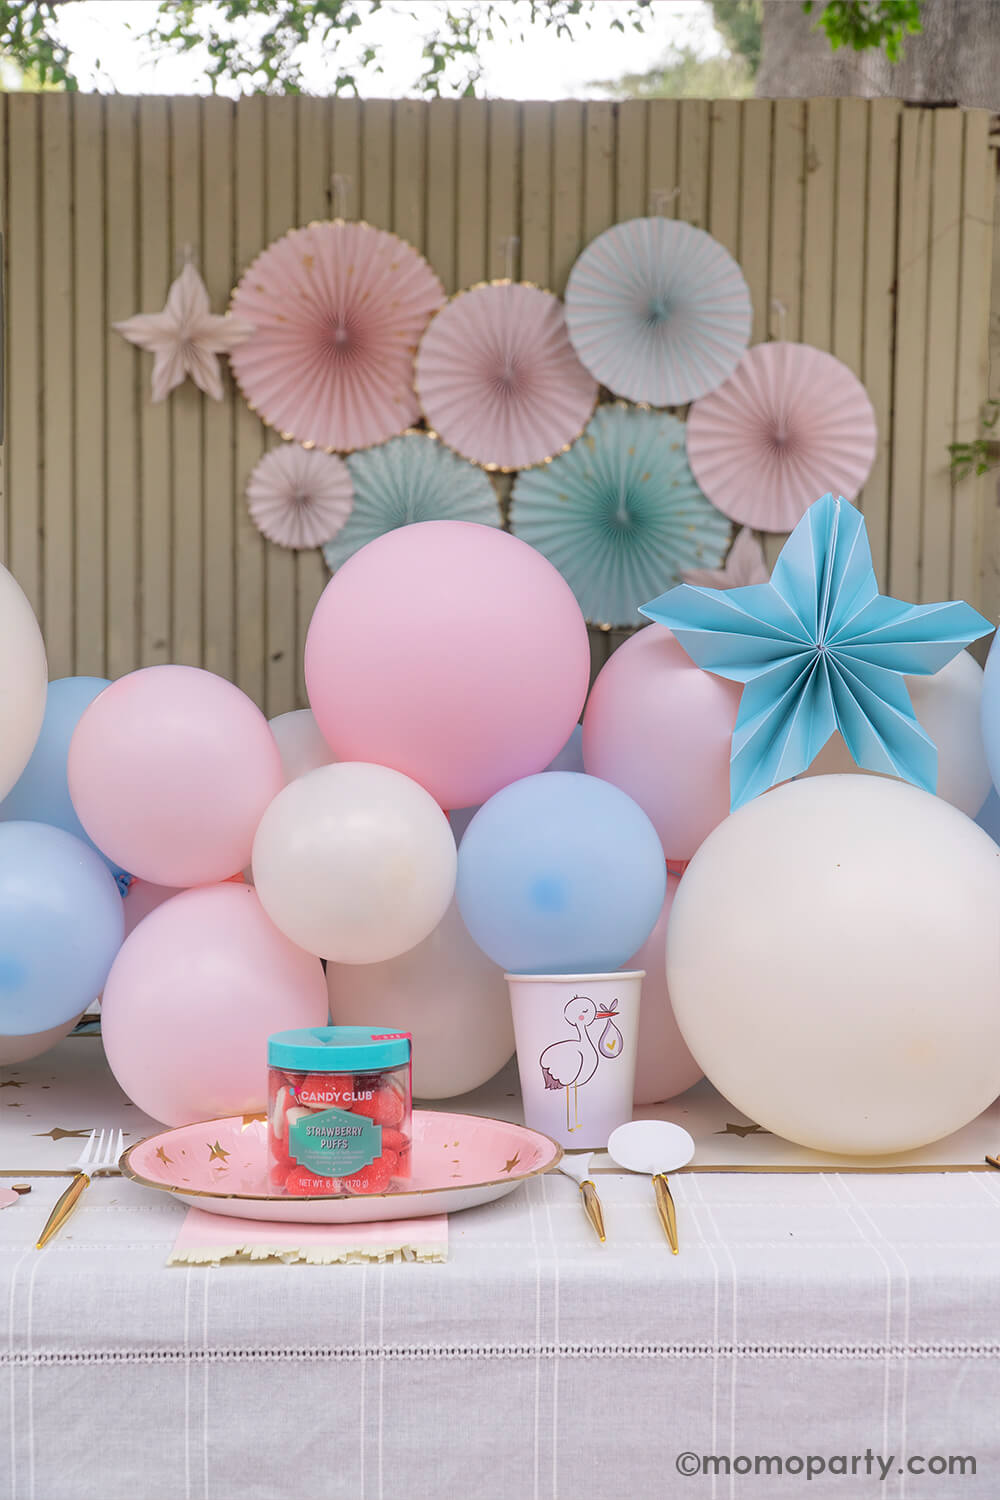 A gender reveal party table with beautiful balloon garland as the centerpiece in the middle, in the far back is a wall decorated with My Mind's Eye's Oh baby pink party fans and blue party fans featuring cute star-shaped paper fans, perfect for a sweet backdrop.